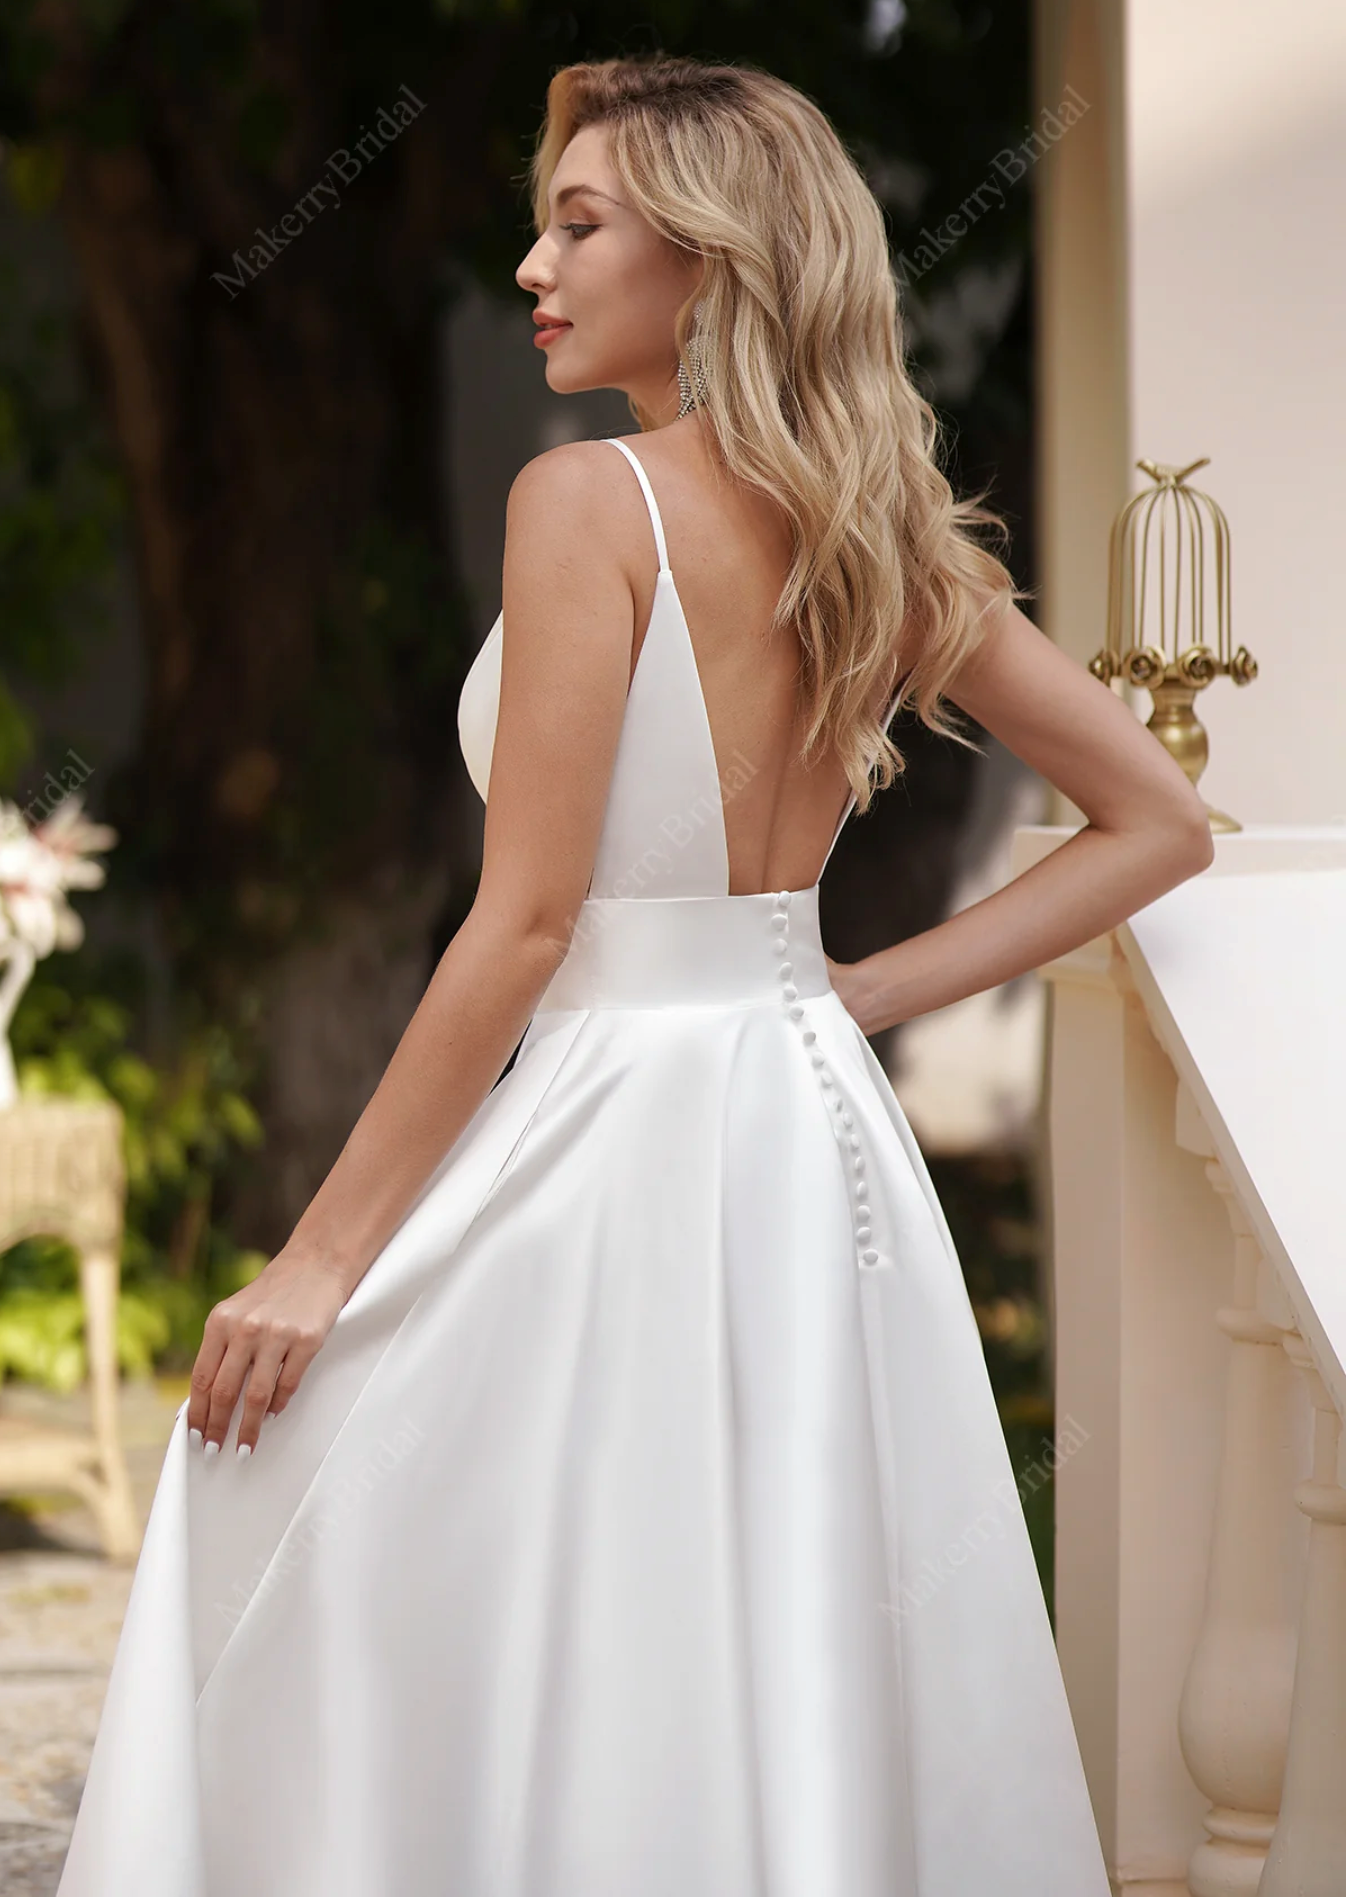 Simple Satin Wedding Dress With Beaded Backless – TulleLux Bridal